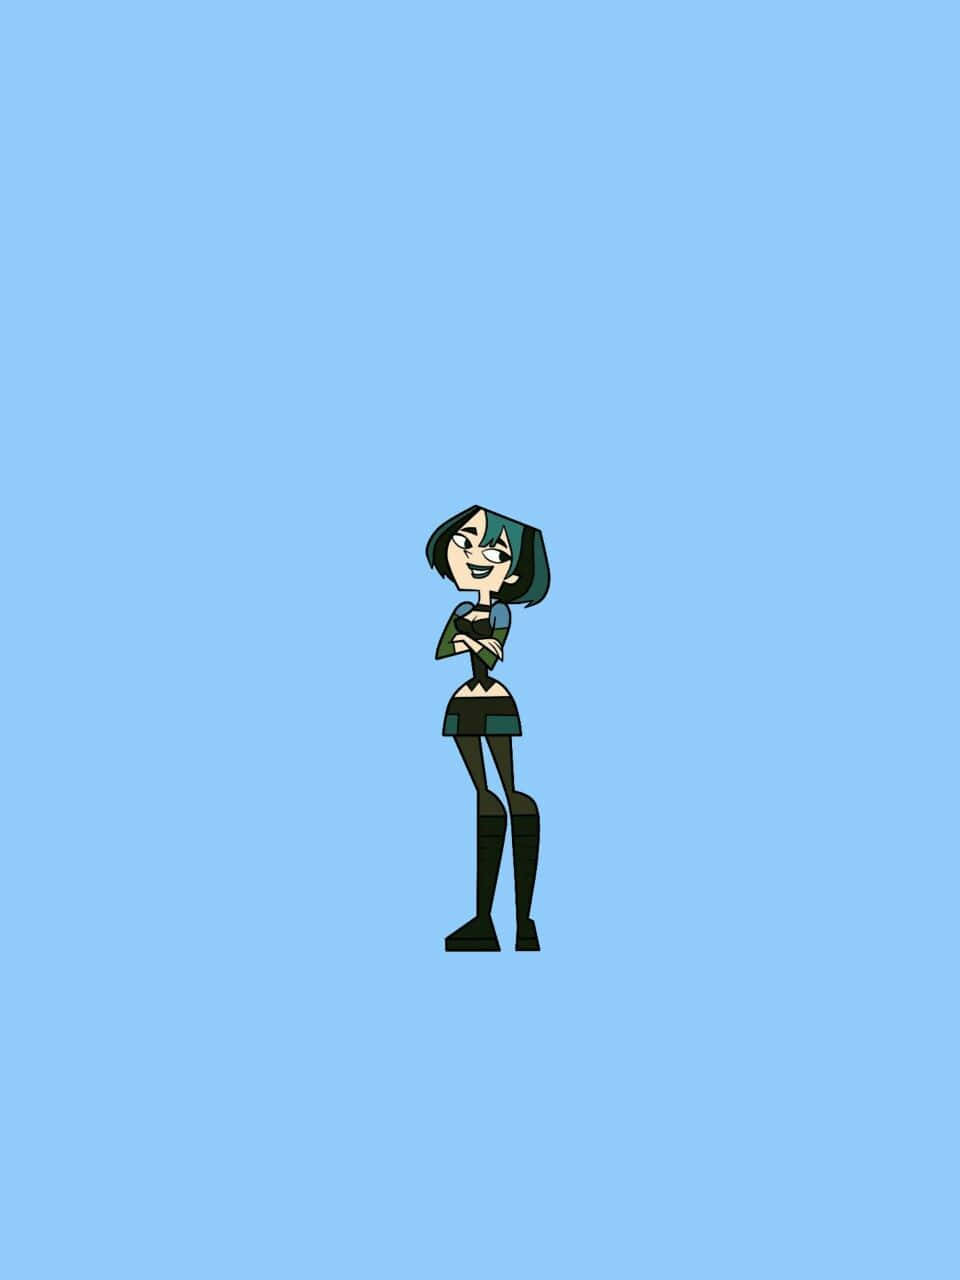 A Cartoon Girl In Black And Blue Standing On A Blue Background